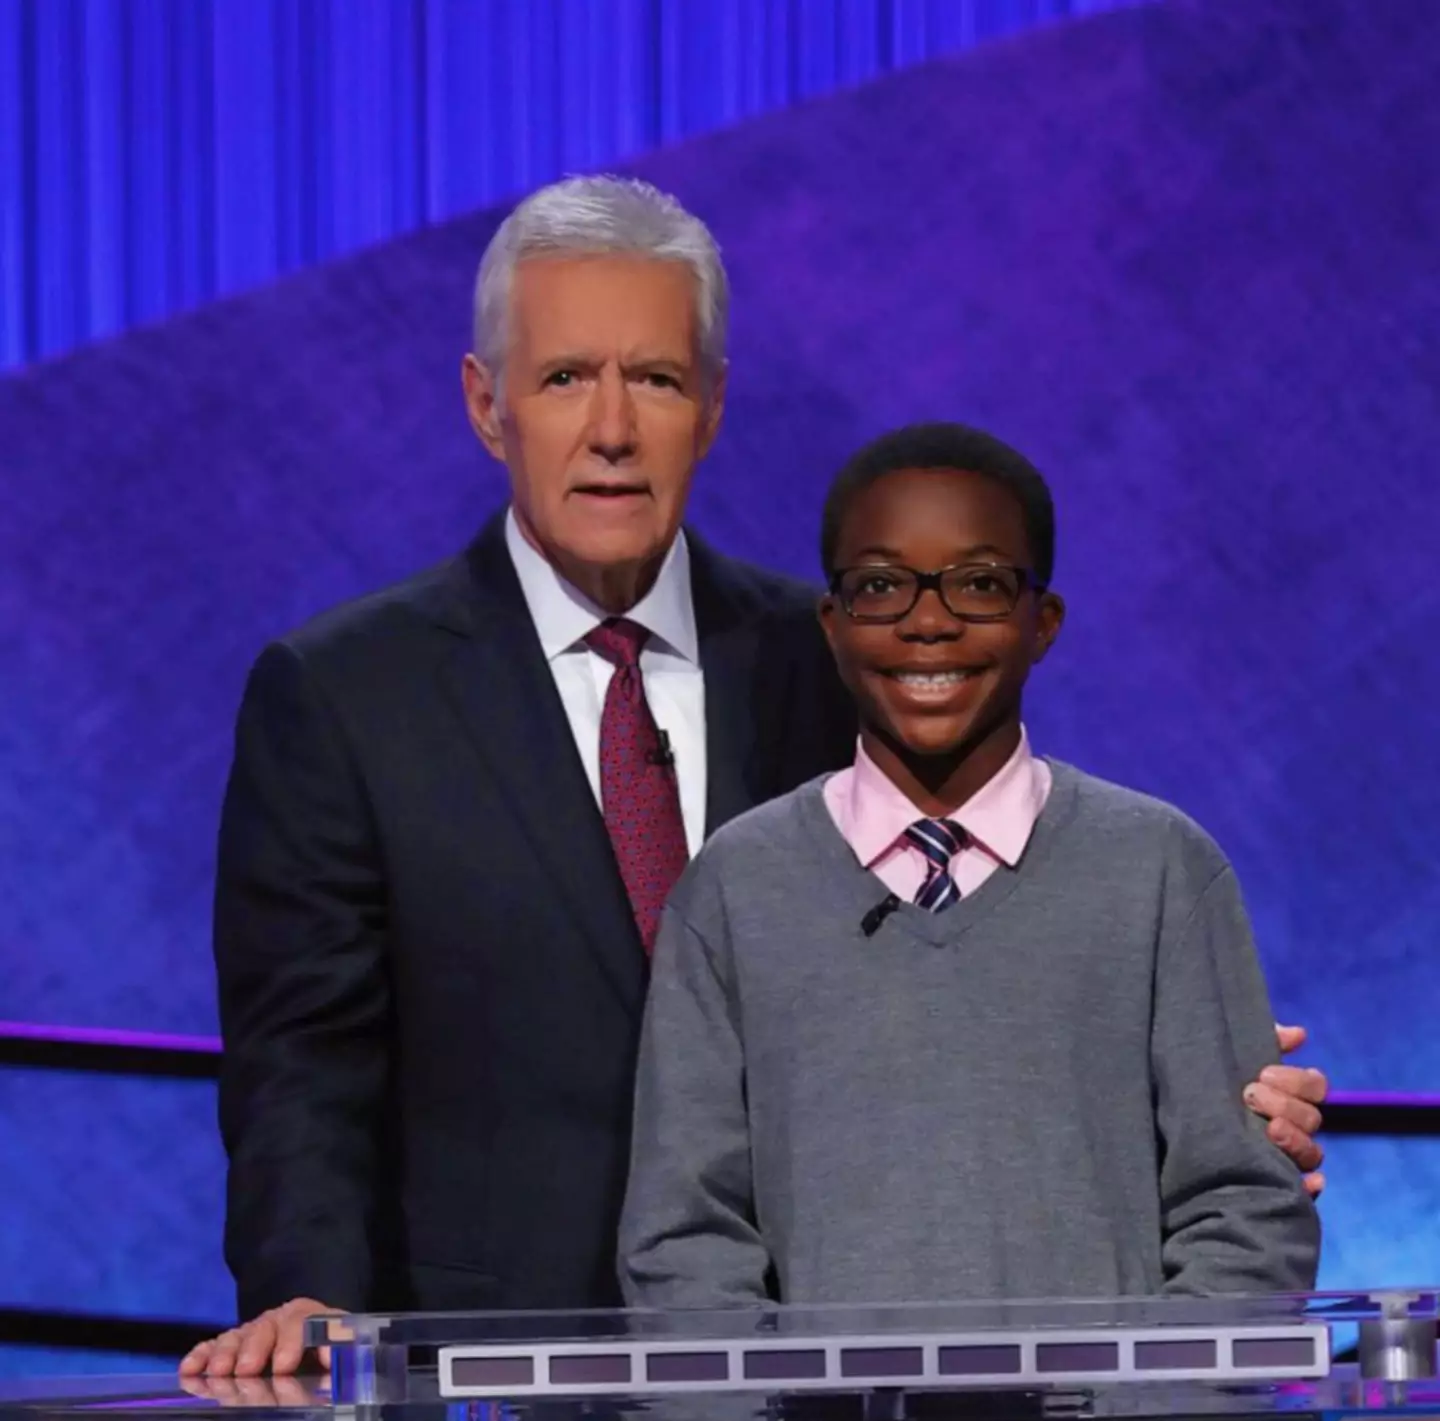 Kukoyi took part in the Jeopardy! Teen Tournament back in 2018.